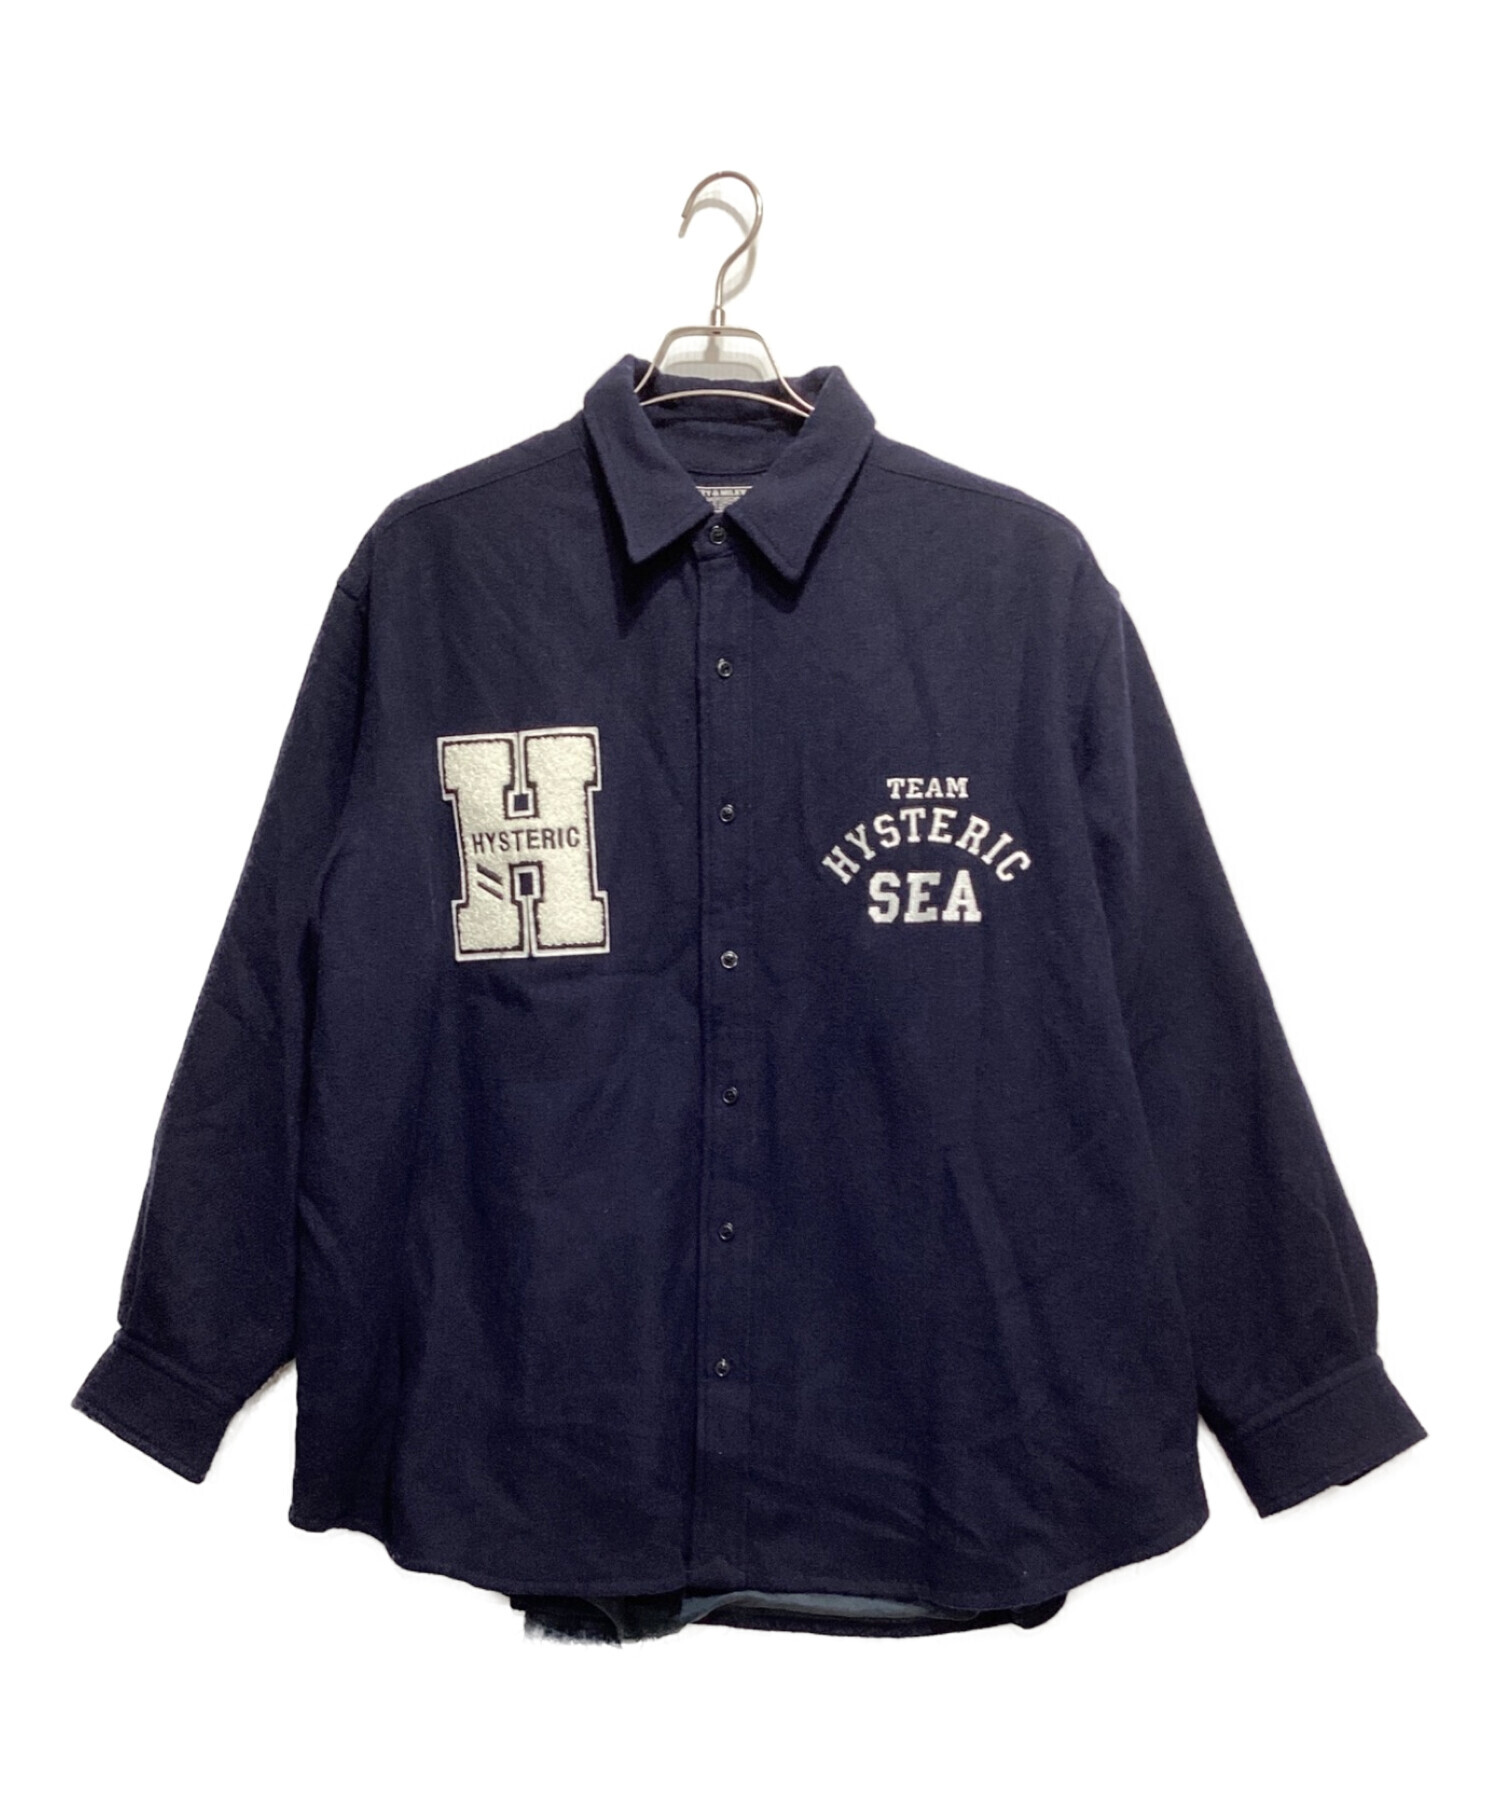 WIND AND SEA × HYSTERIC GLAMOUR NAVY L値下げは考えておりません